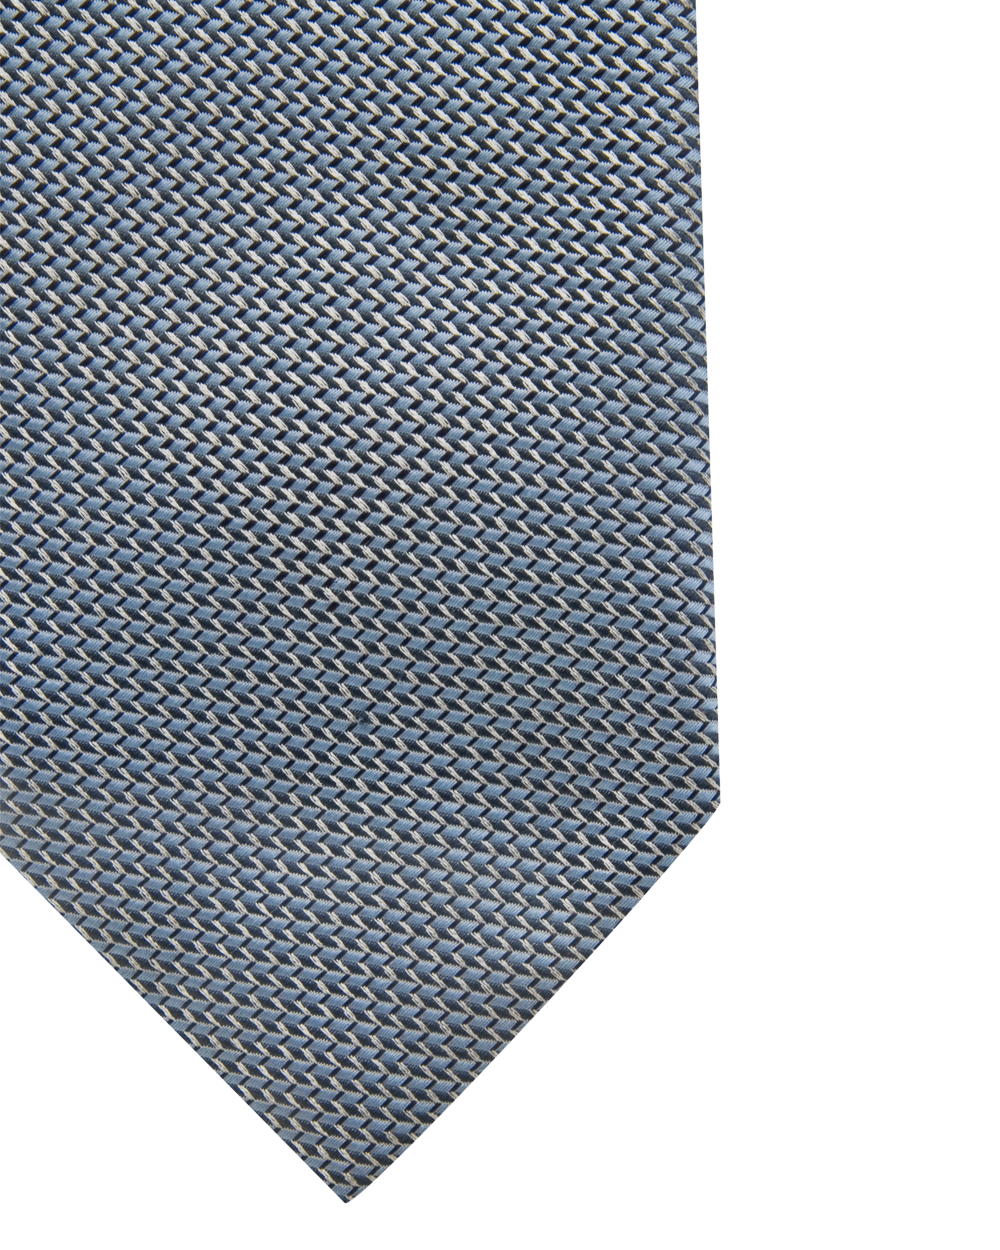 Bluette and Flannel Contrast Tie